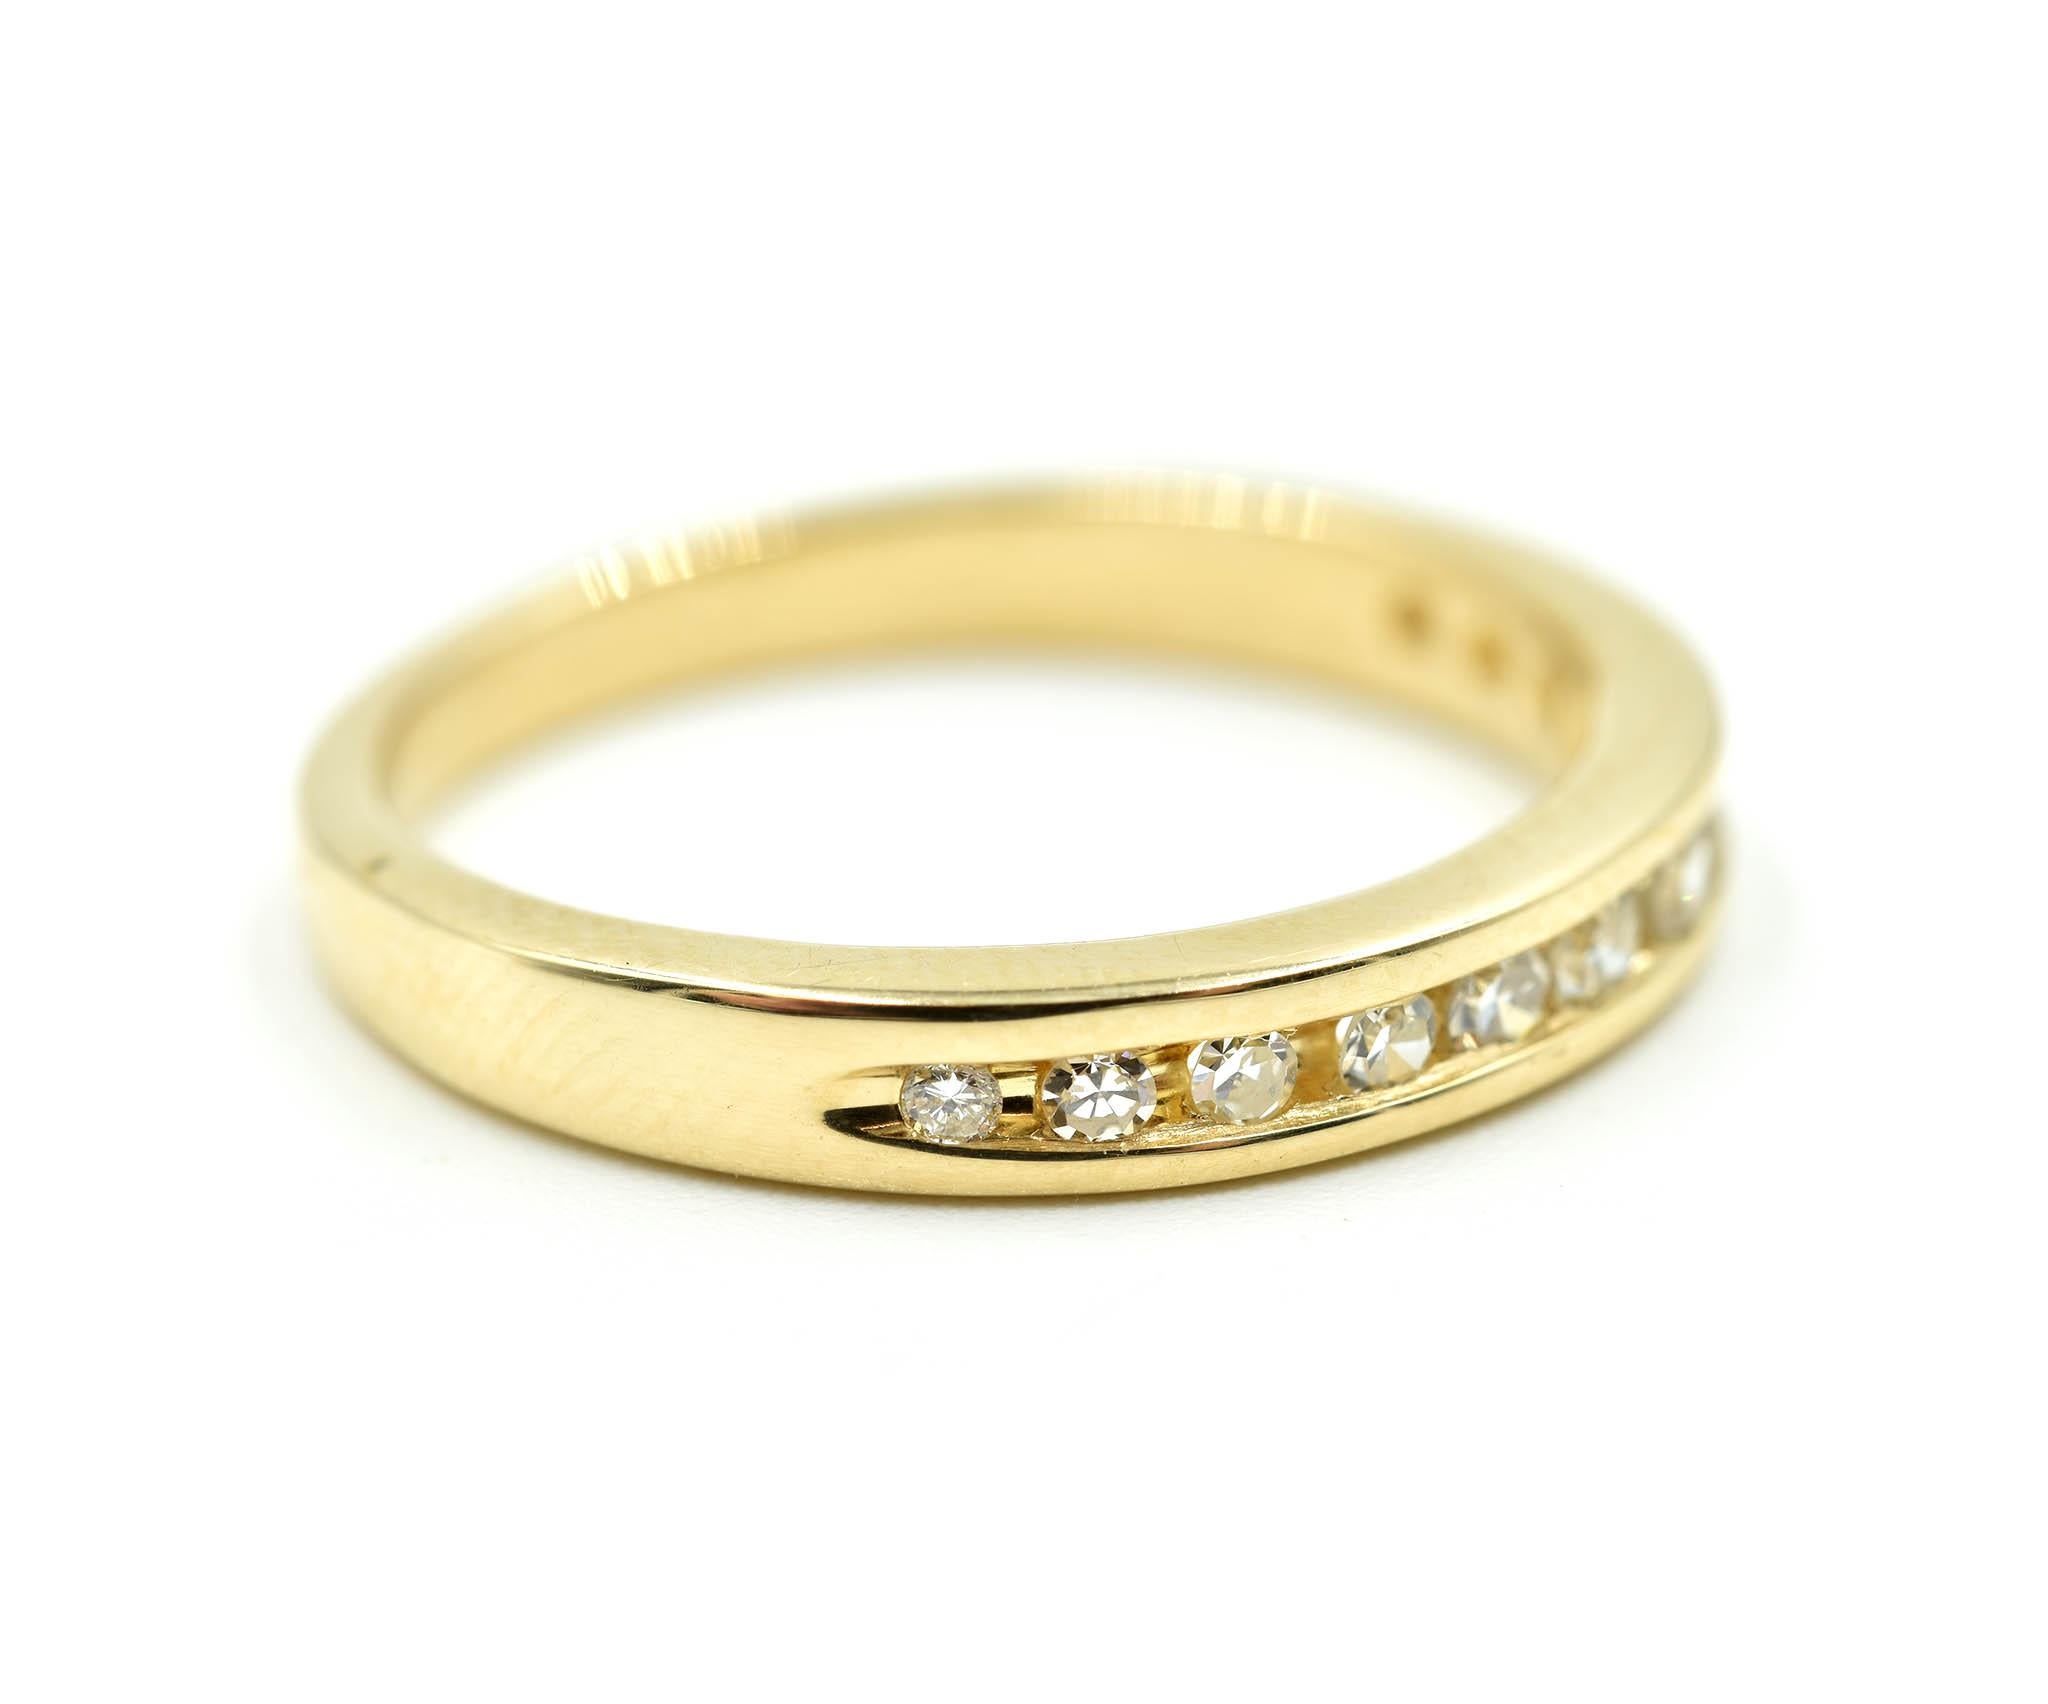 Designer: custom design
Material: 14k yellow gold
Diamonds: 12 round brilliant cuts = 0.26 carat total weight
Color: H
Clarity: VS2-SI1
Dimensions: top of ring is 3.27mm long and 21.63mm wide
Ring size: 7 ¾ 
Weight: 3.06 grams
